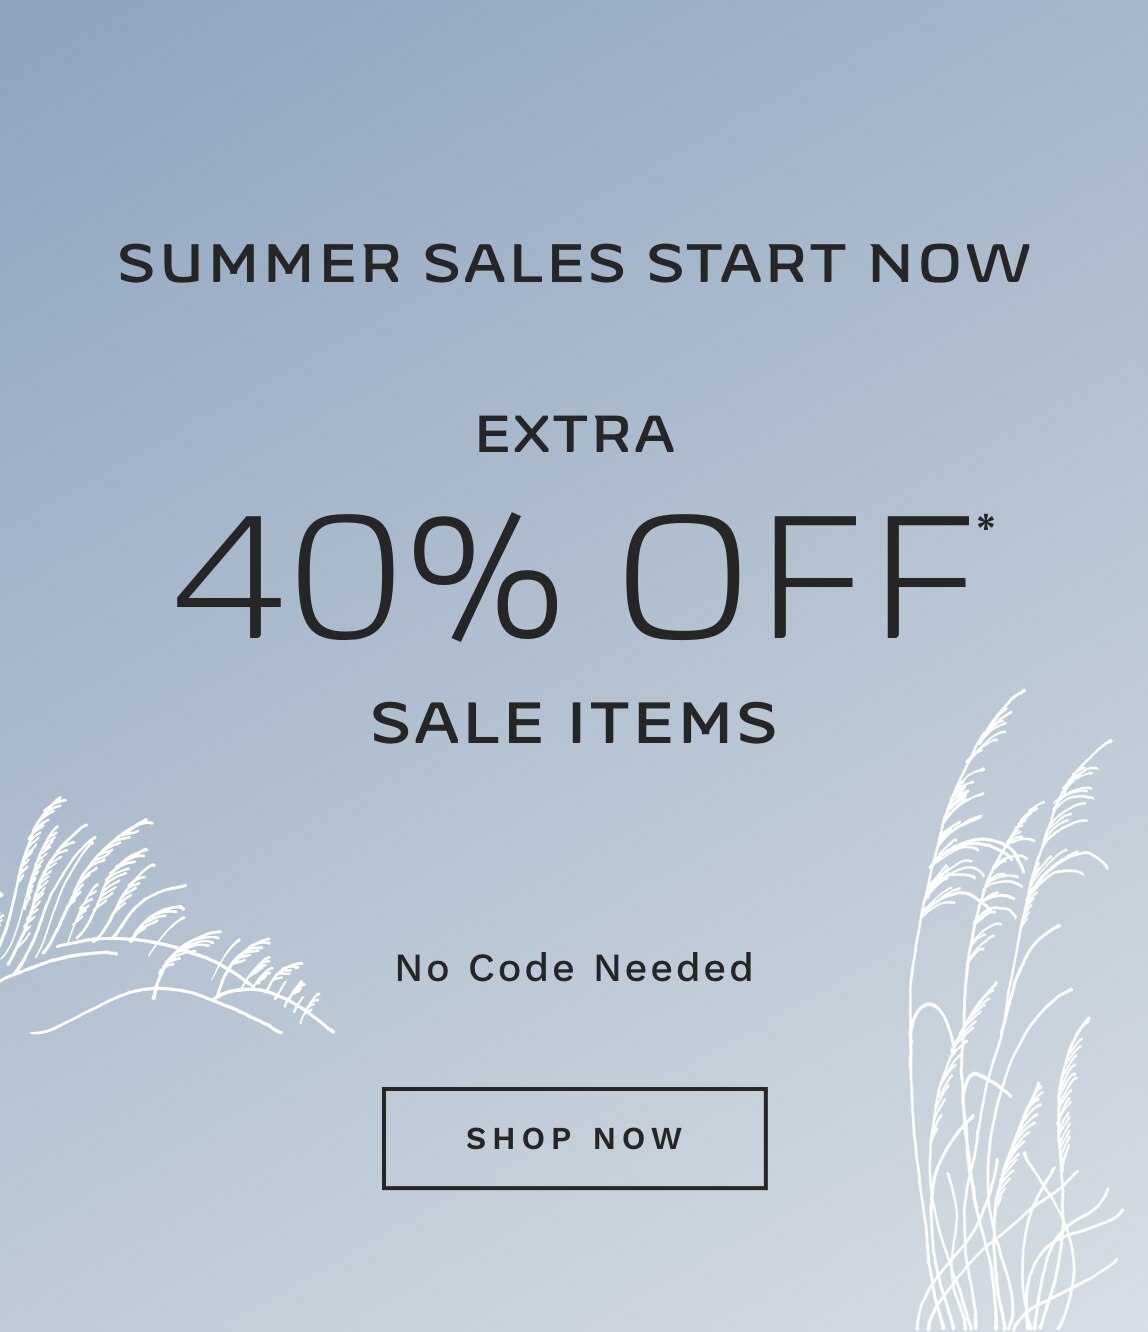 SUMMER SALES START NOW EXTRA 40% OFF* SALE ITEMS No Code Needed SHOP NOW